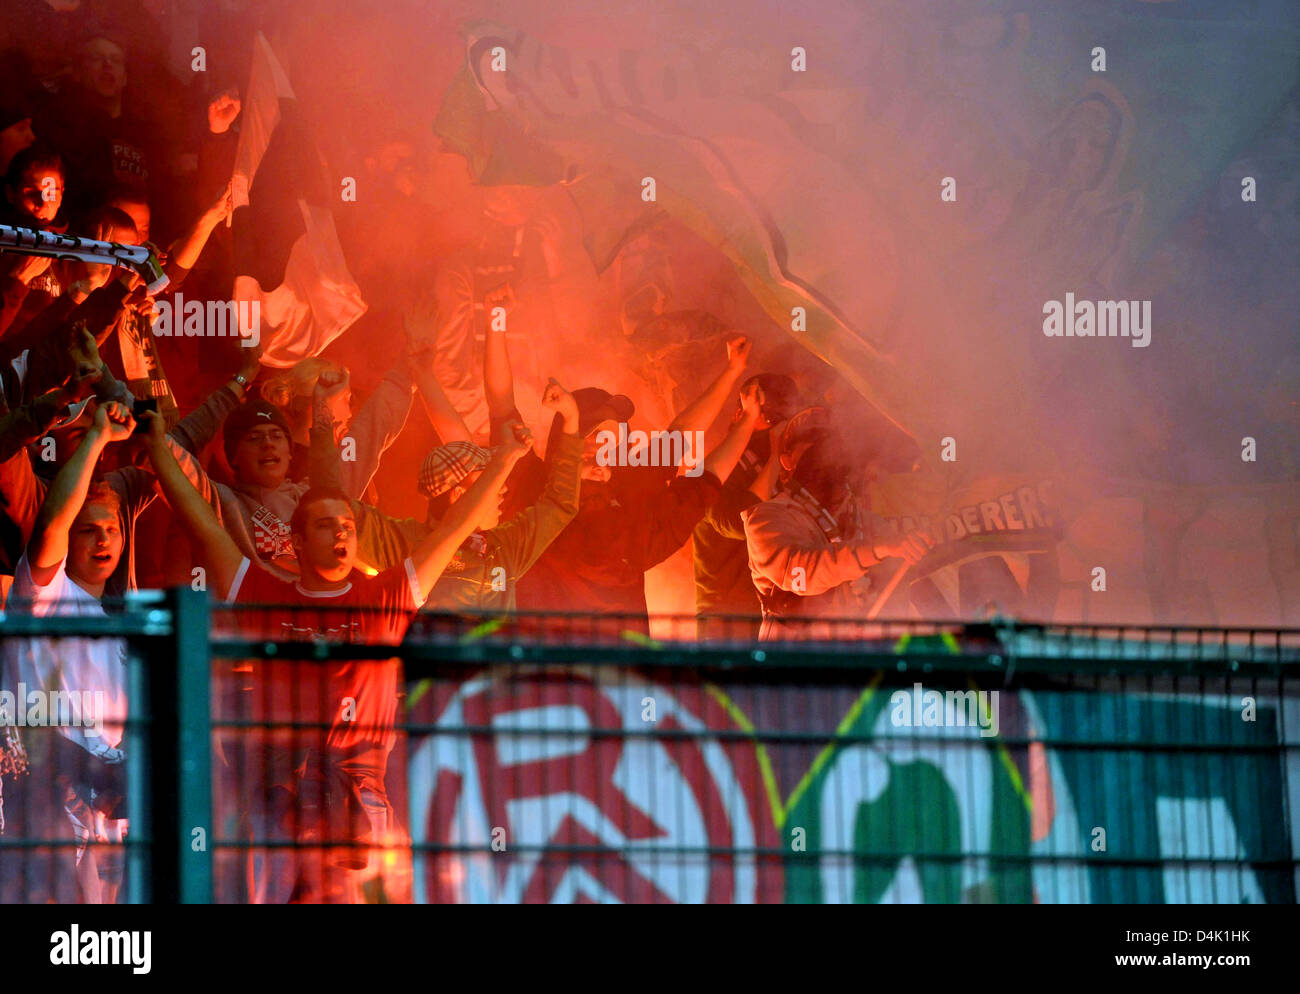 Fans of Werder Bremen light fireworks during the UEFA Cup last sixteen return match against AS Saint-Etienne at Stadium Geoffroy Guichard in Saint Etienne, France, 18 March 2009. The game ended in a 2-2 tie with Bremen qualifying for the quarter-finals. Photo: Carmen Jaspersen Stock Photo